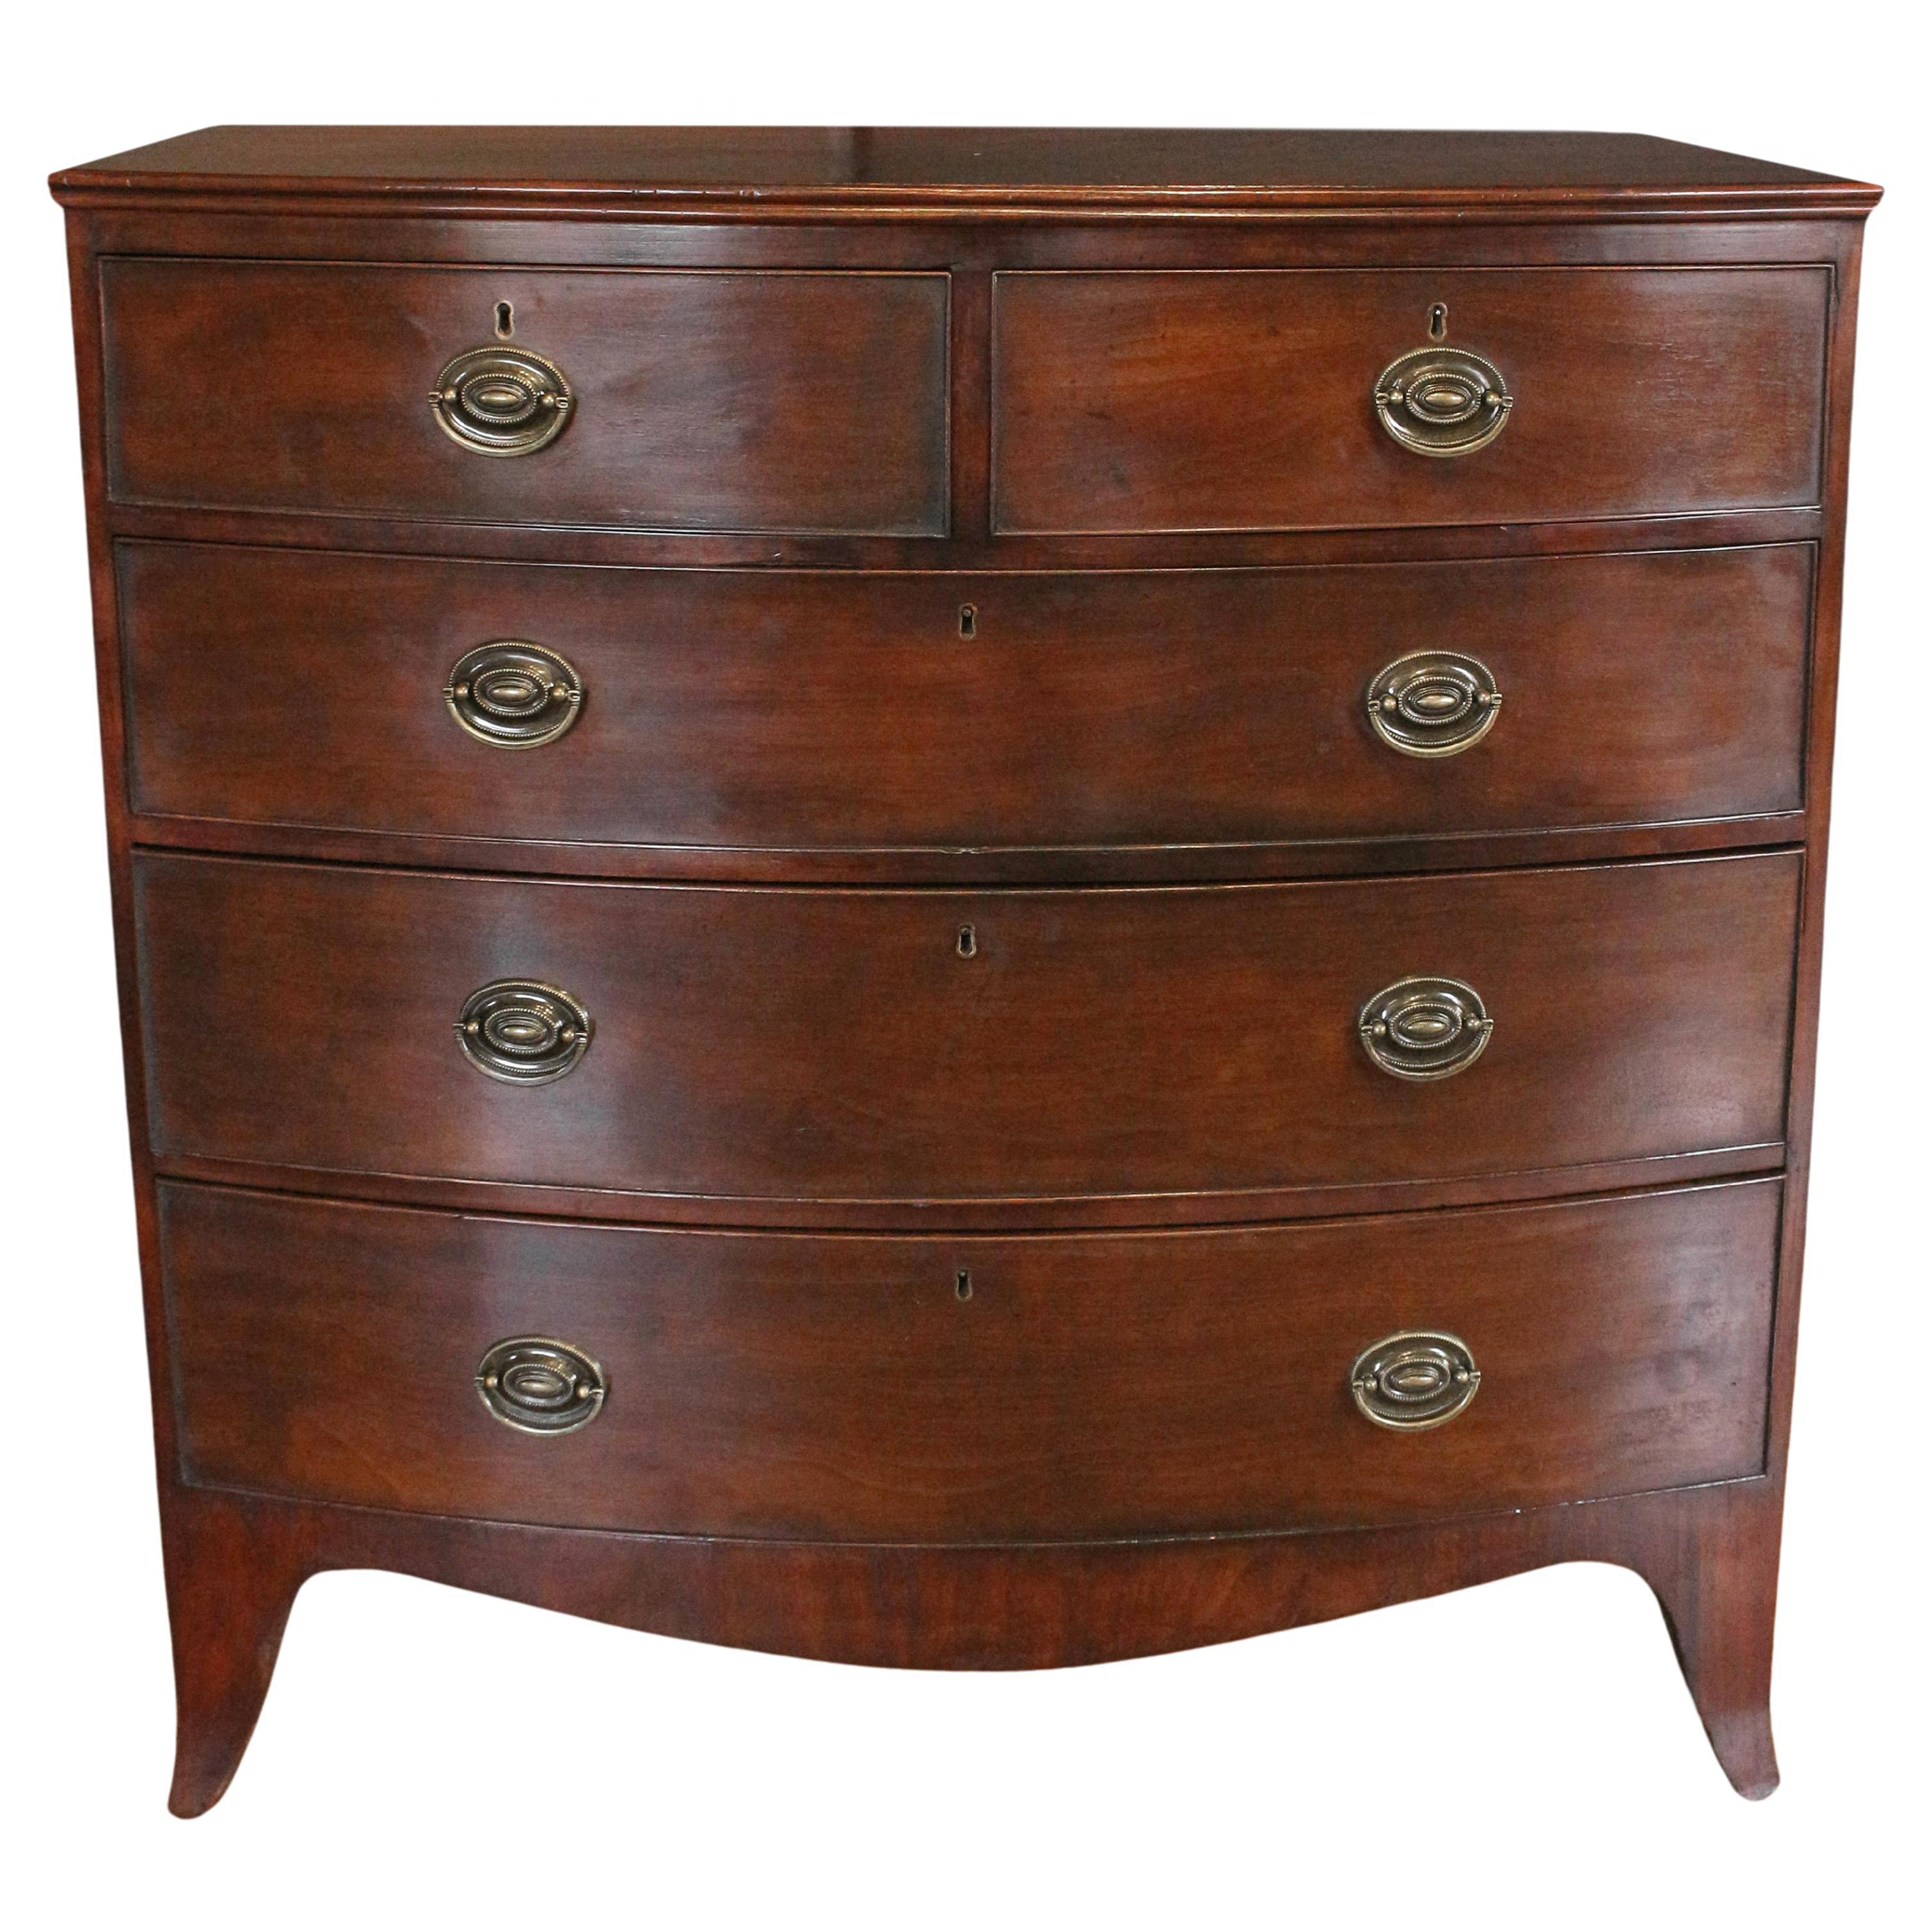 Early 19th century bowfront chest of drawers, English. Georgian period. Two short over 3 long graduated drawers. Raised on French splay feet. Double molded top. Oak secondary wood. Appropriately replaced oval brass pulls.
41 3/8